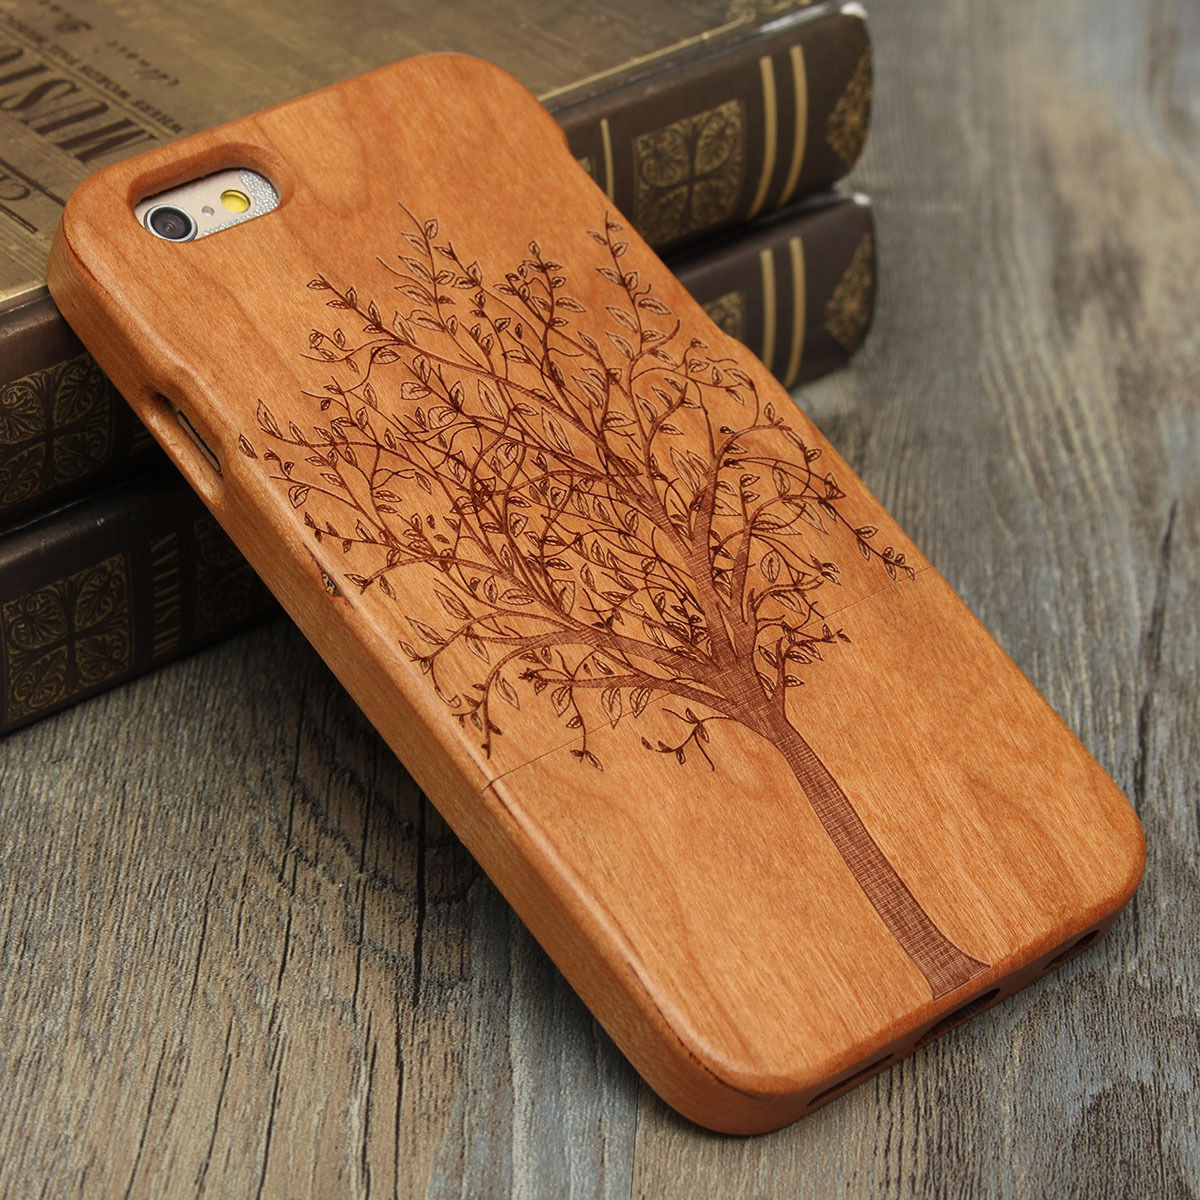 Luxury Natural Wood Wooden Bamboo Hard Cover Phone Case For Apple Iphone 6/6s/plus, Tree